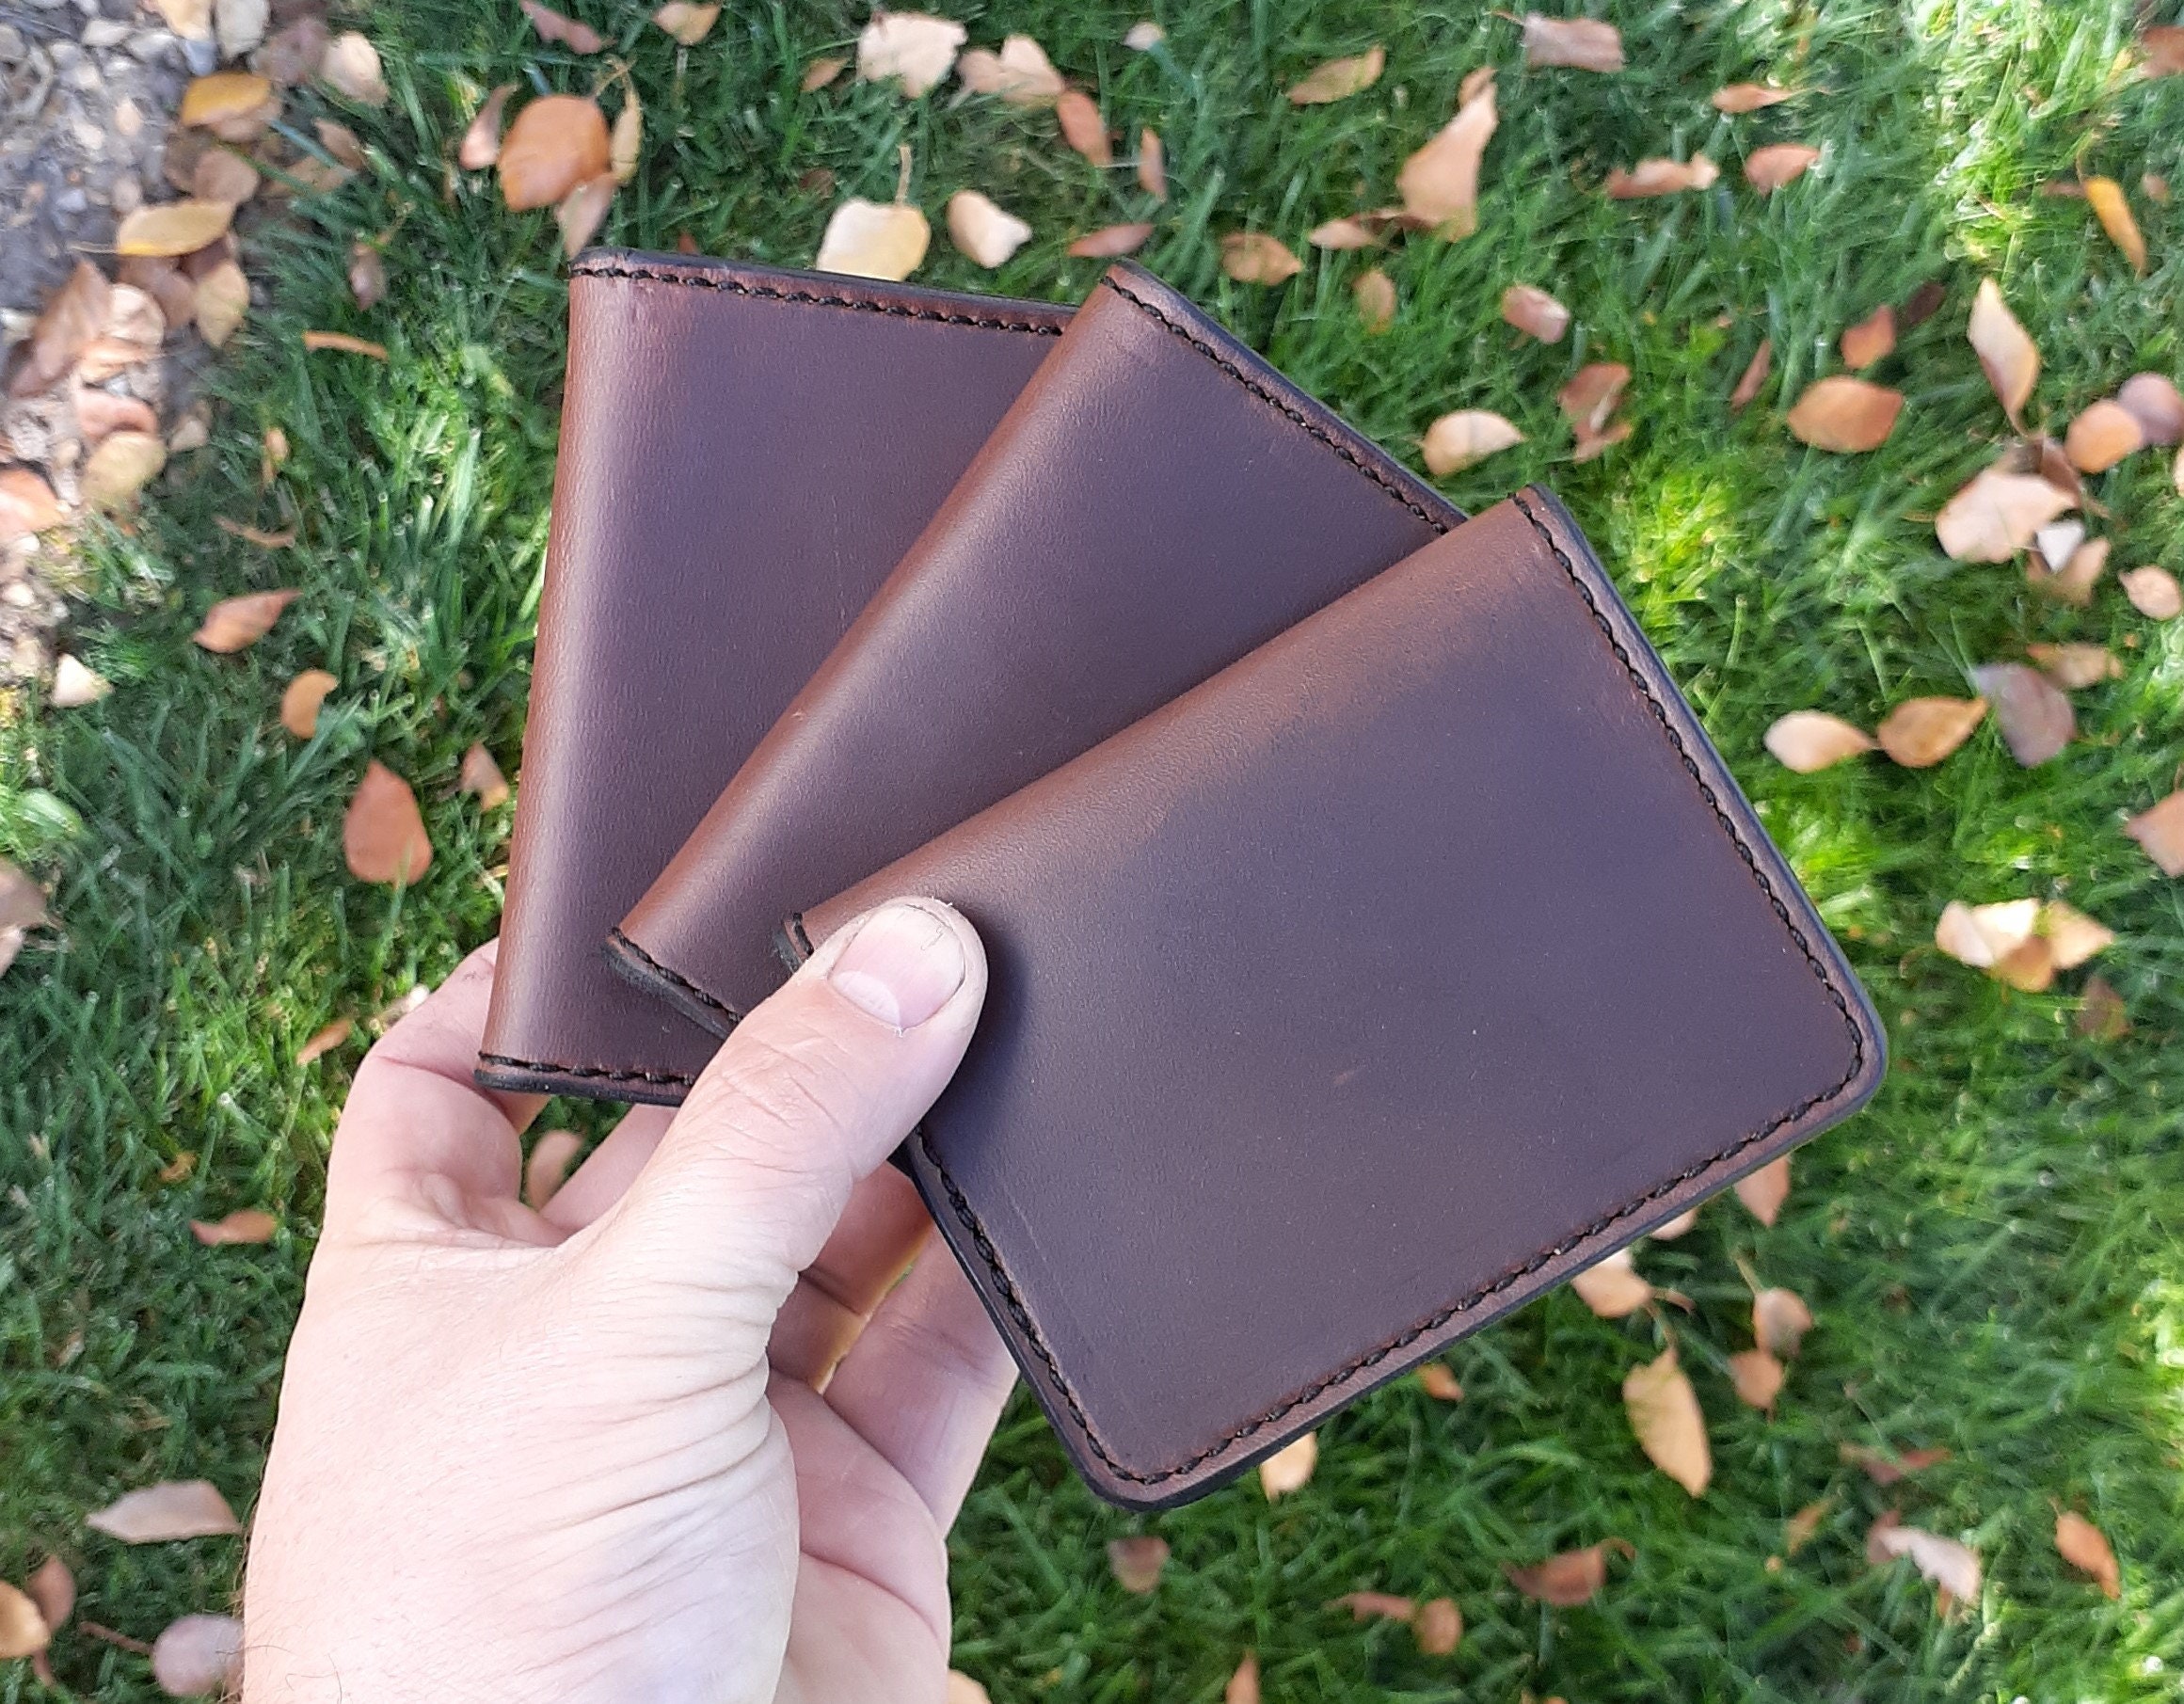 Leather minimalist wallet made with Horween Chromexcel leather horse hide  slim wallet